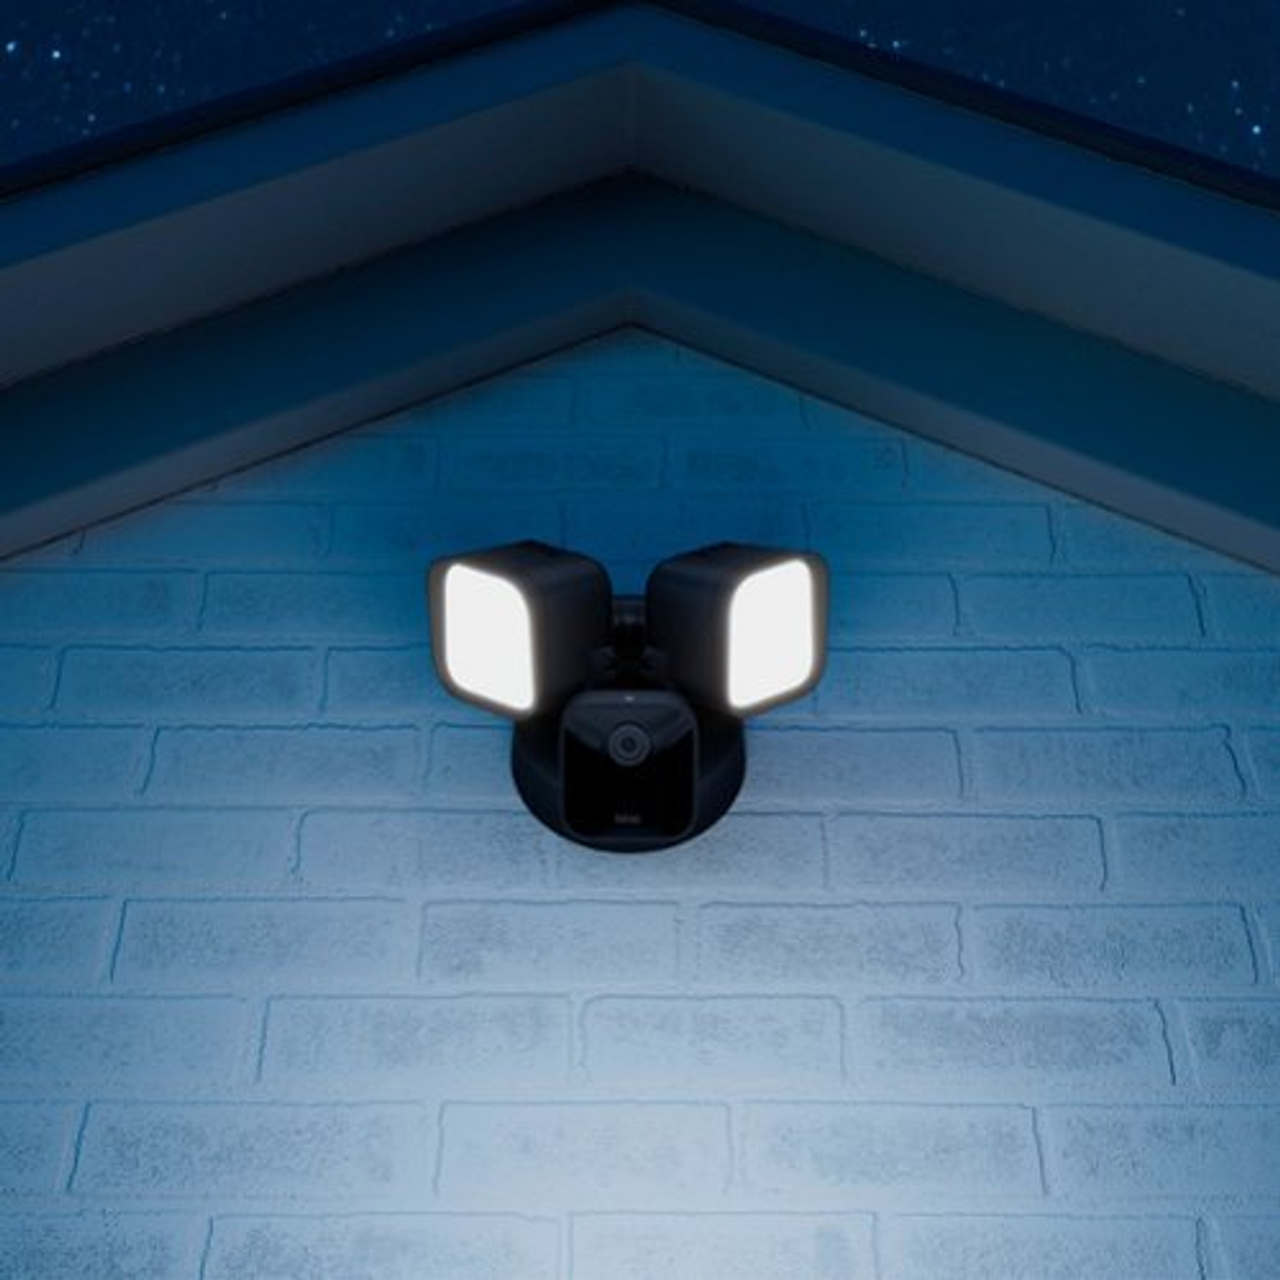 Blink - Outdoor Wired 1080p Security Camera with Floodlight - Black